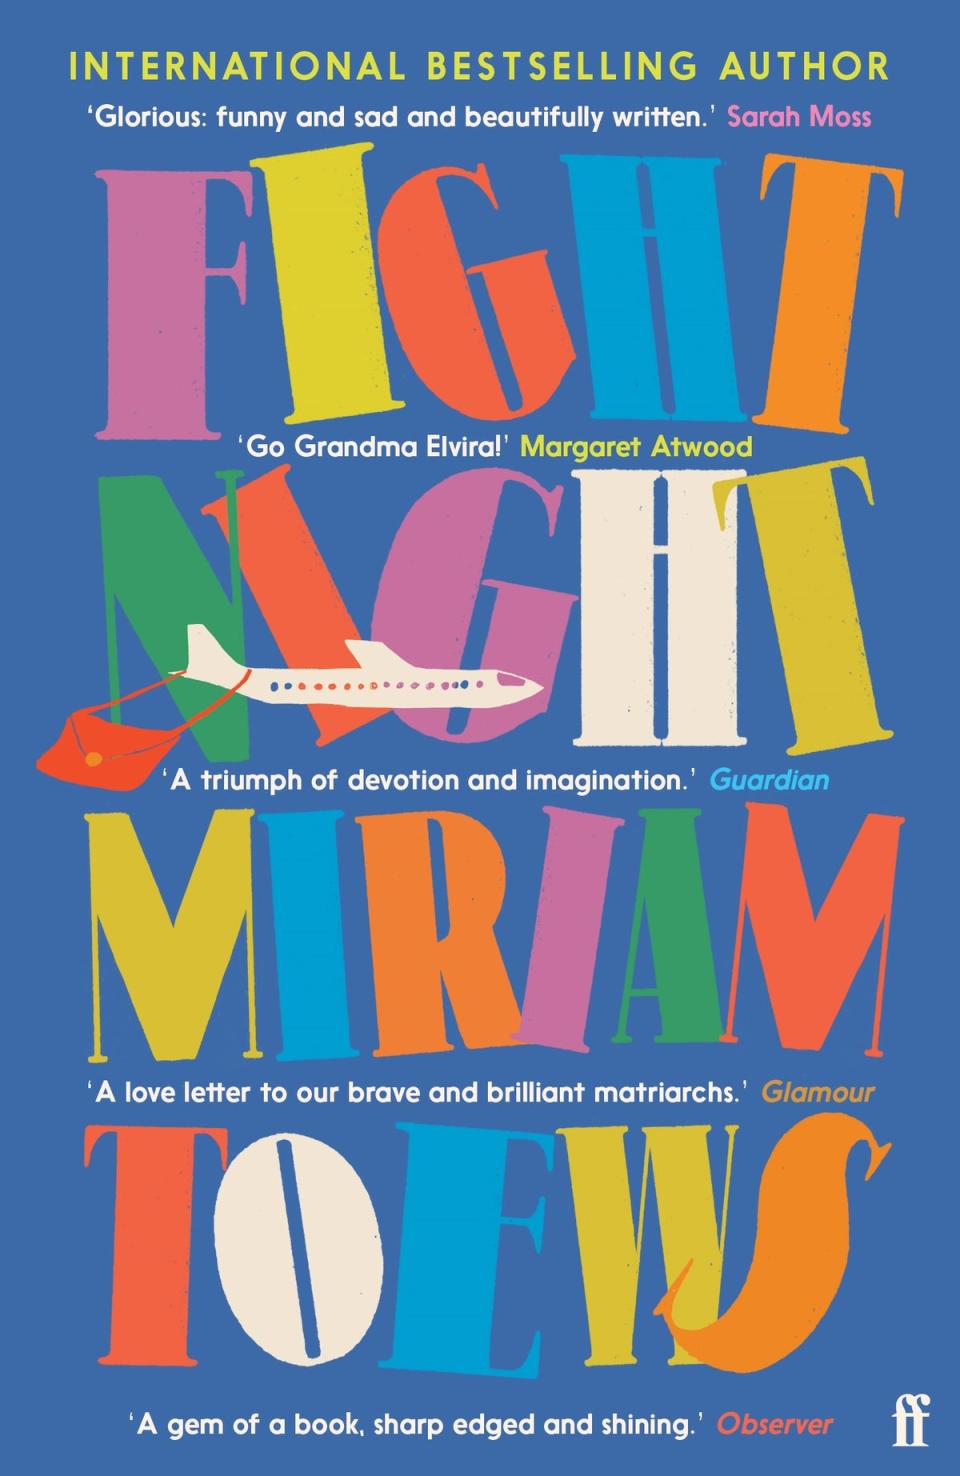 ‘Fight Night’ by Miriam Toews (Faber)